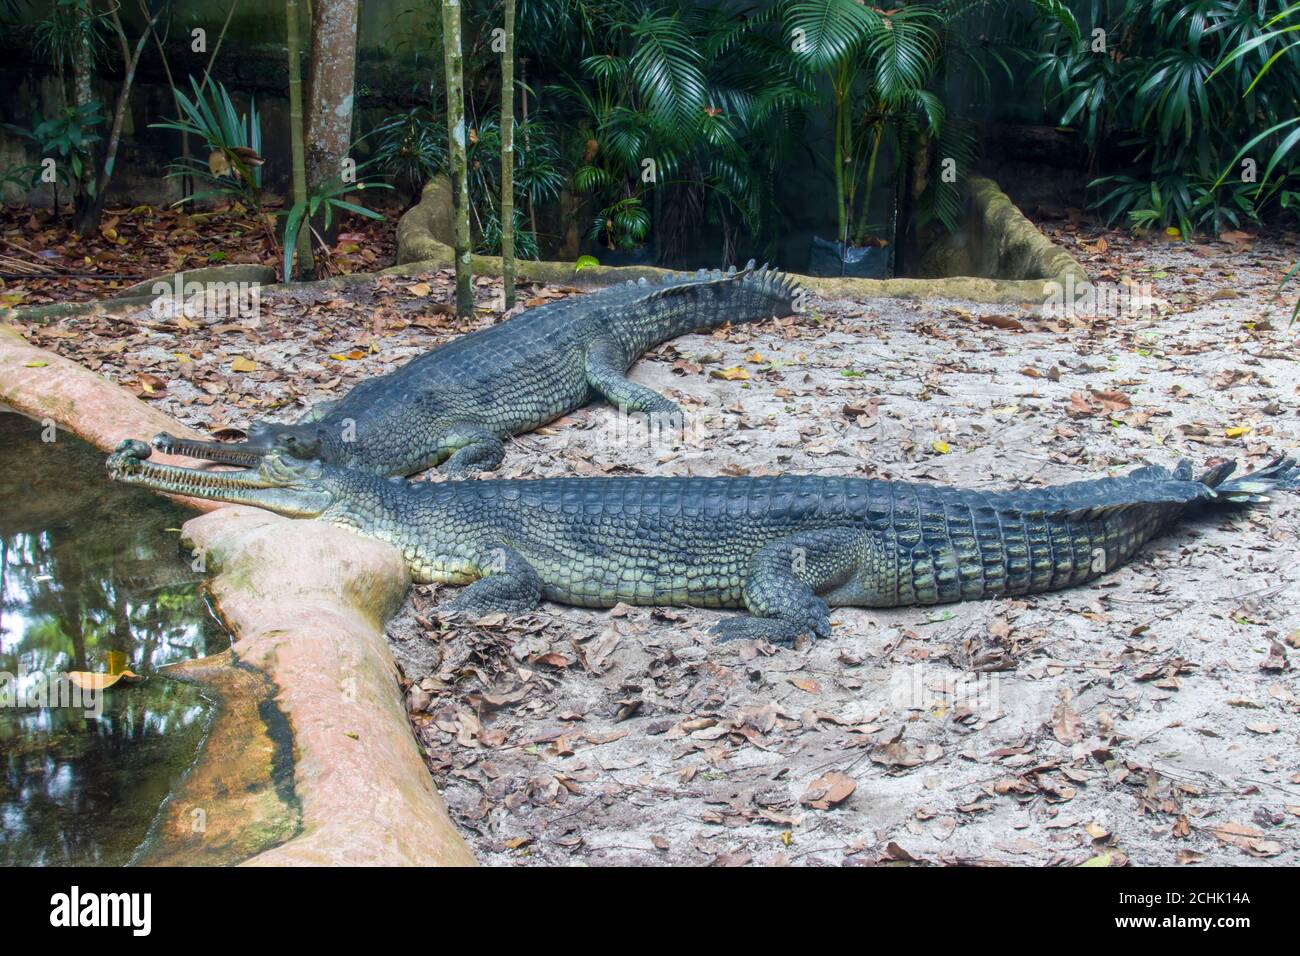 The gharial (Gavialis gangeticus) rests by the pond. It is a crocodilian in the family Gavialidae, native to sandy freshwater river banks. Stock Photo